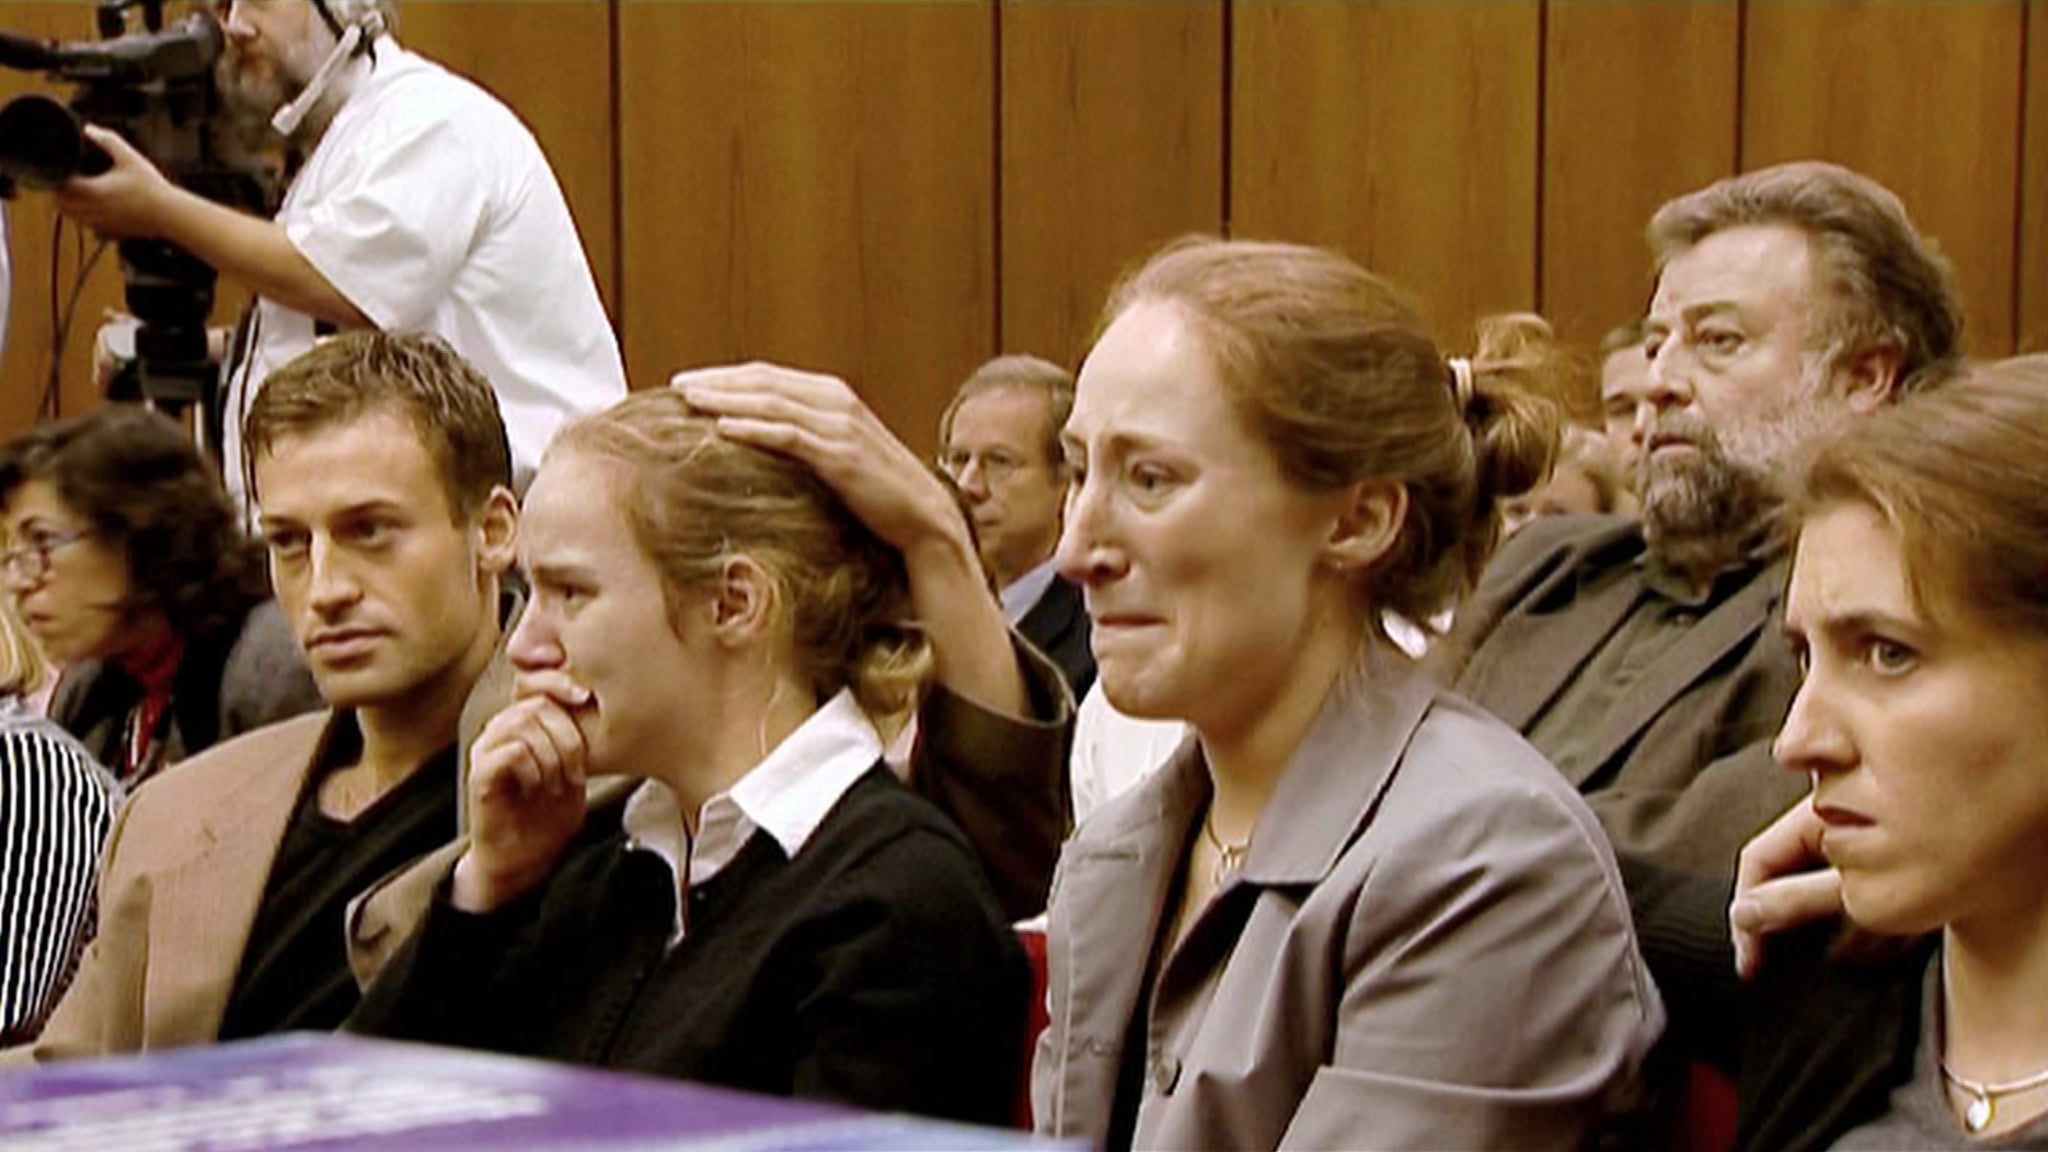 The defendants at the court hearing, crying listening to the case